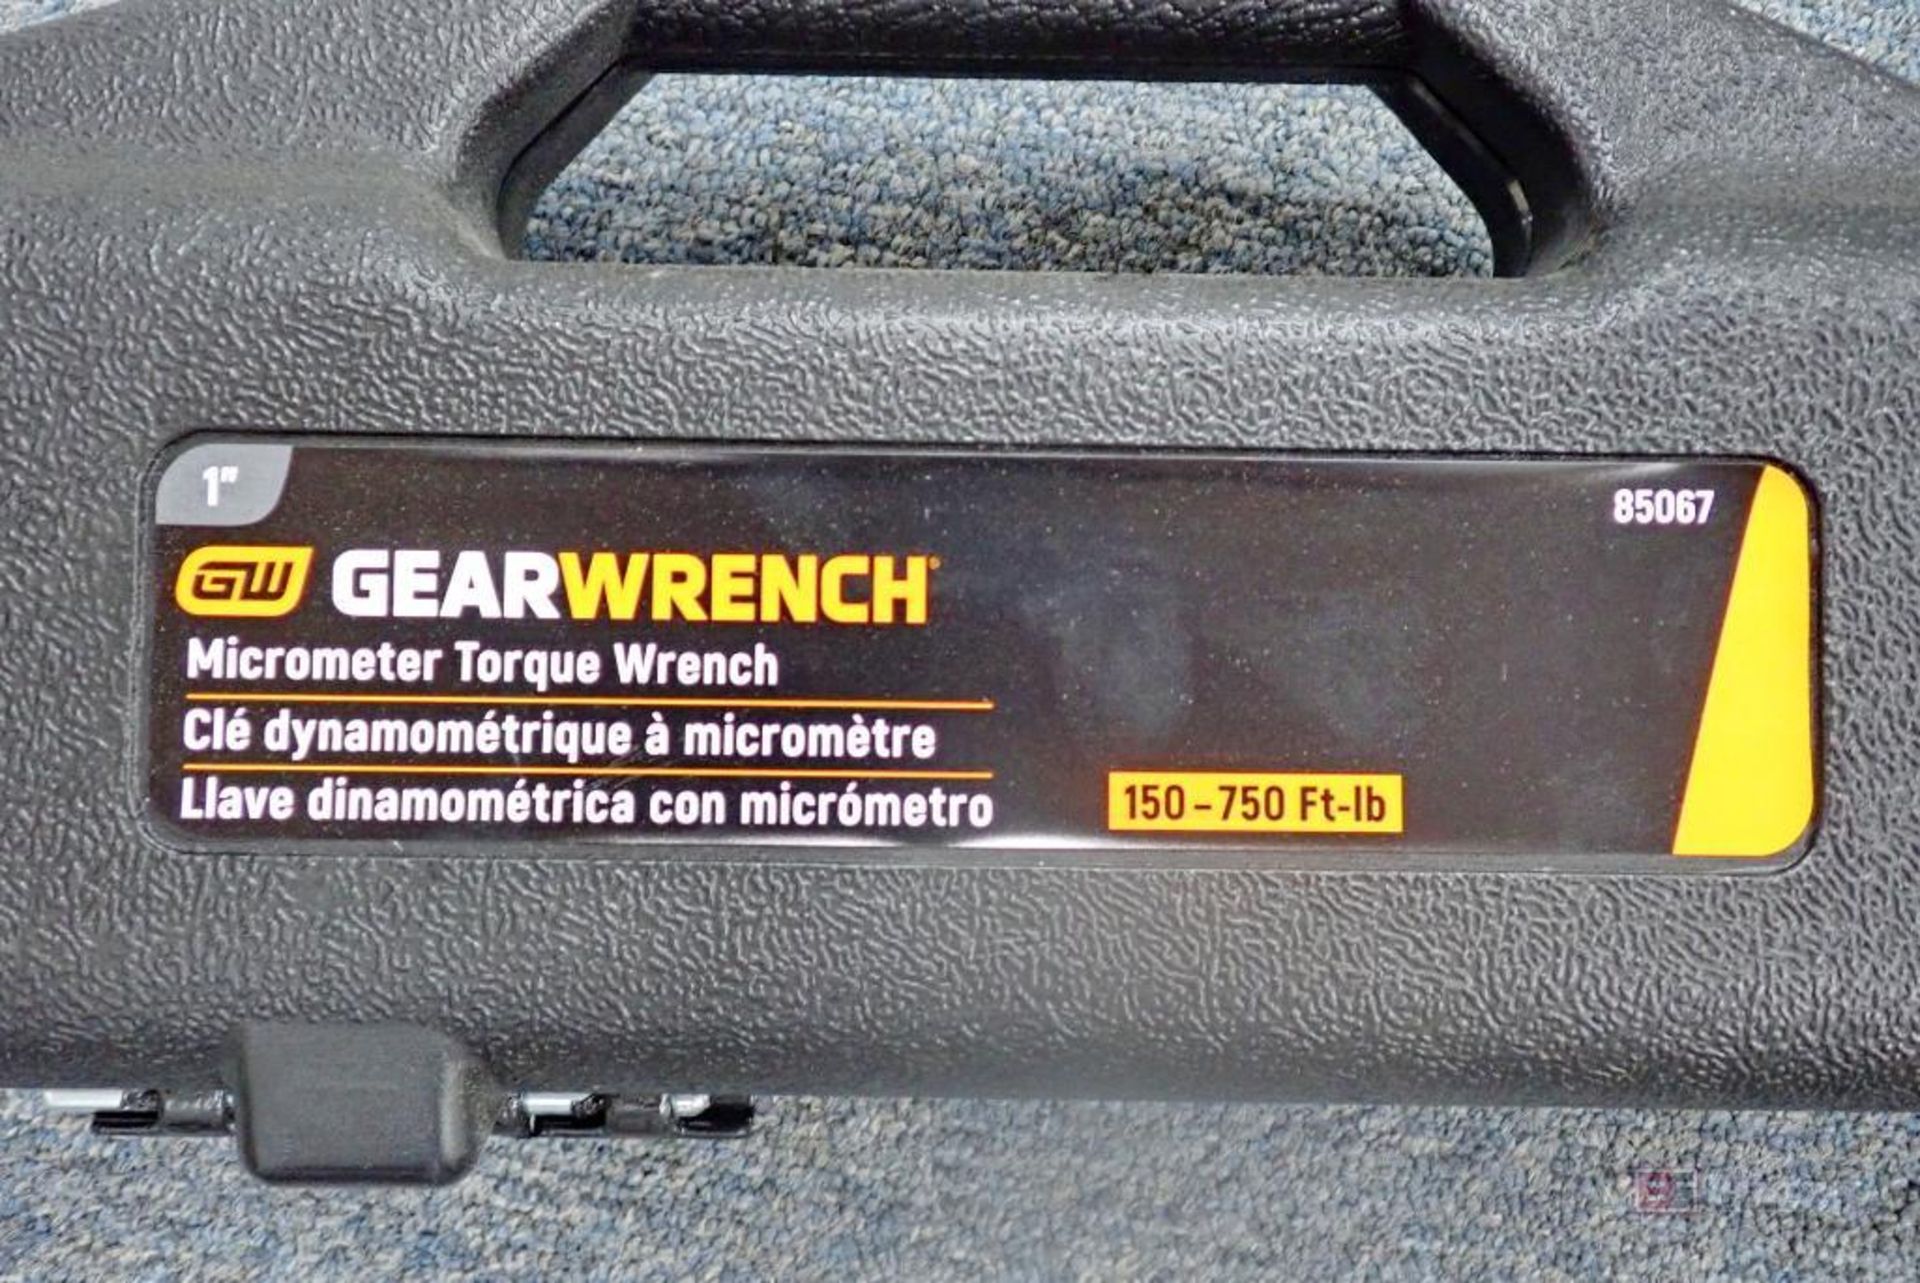 GearWrench 85067 1" Drive Micrometer Torque Wrench - Image 2 of 4